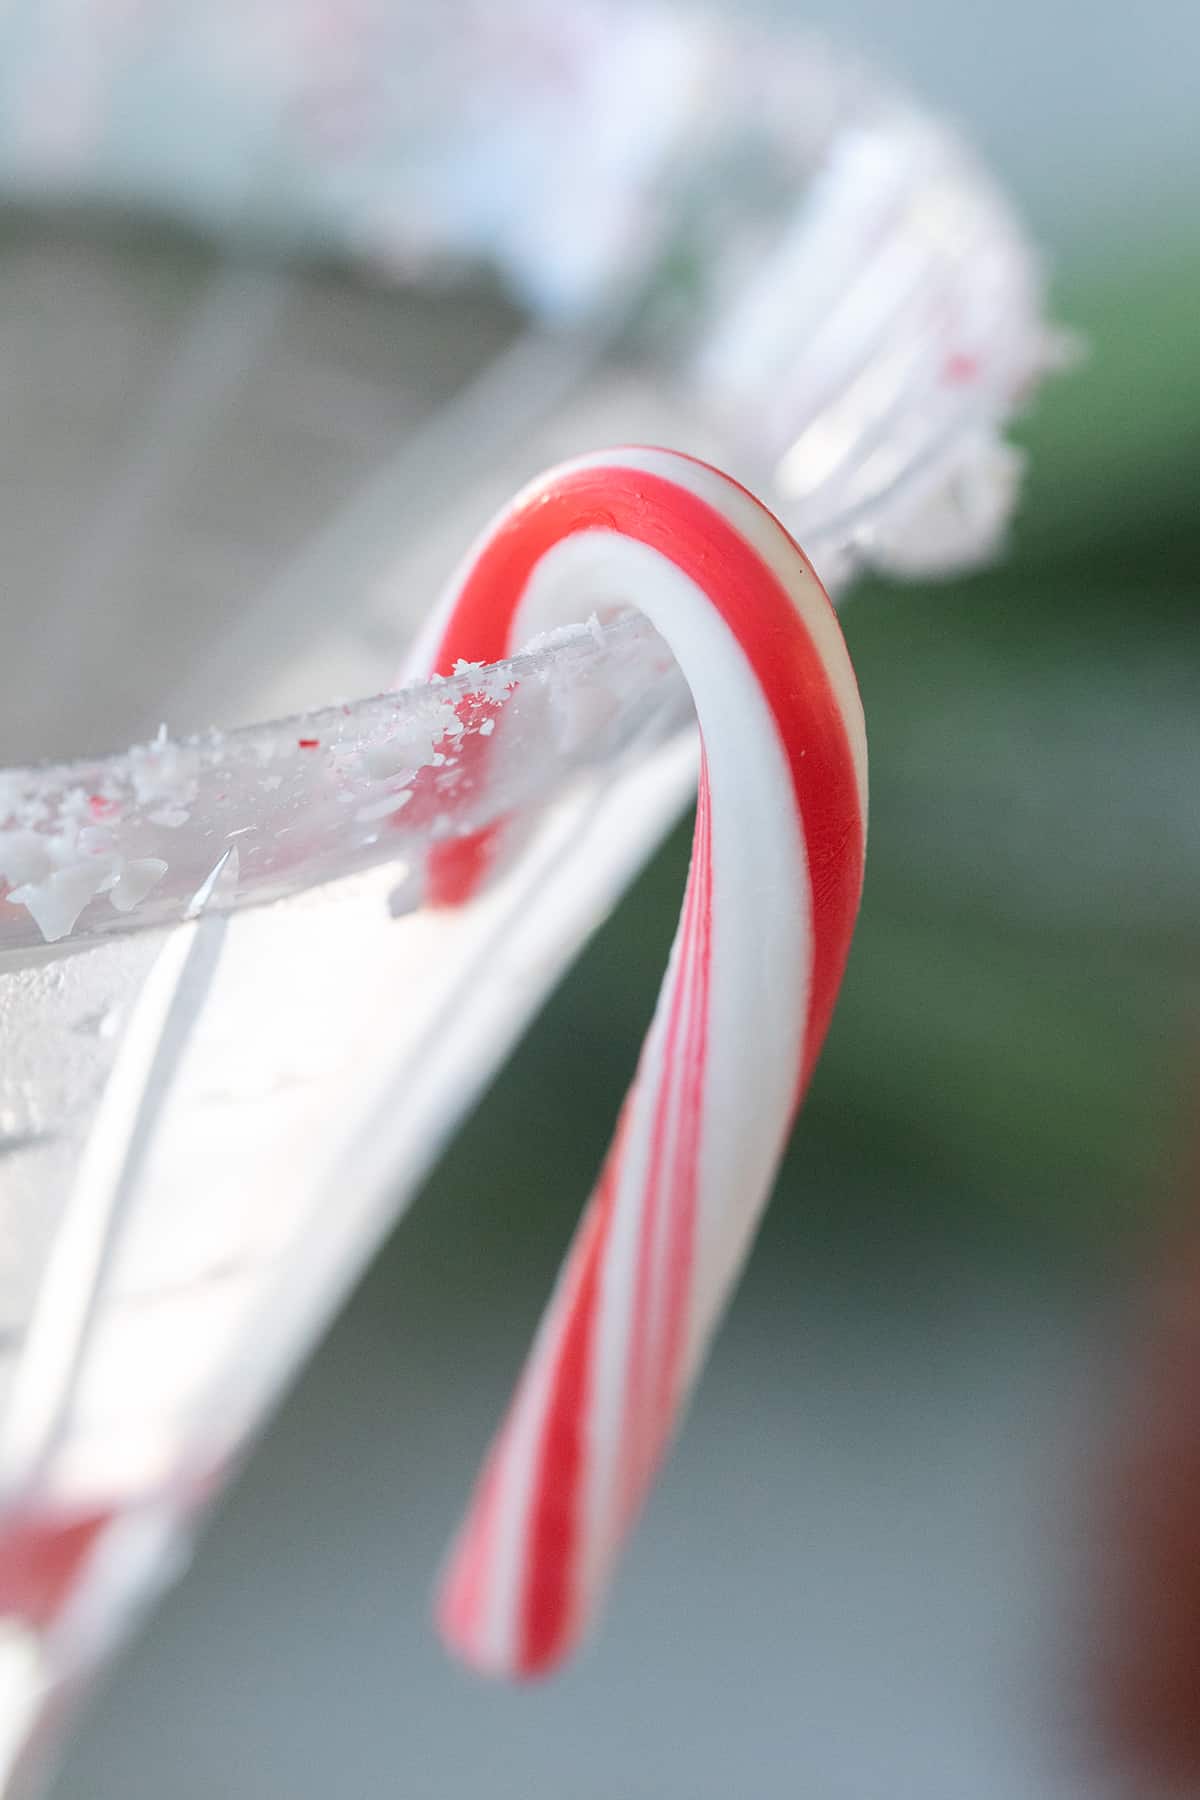 candy cane on a martini glass - chocolate peppermint martini